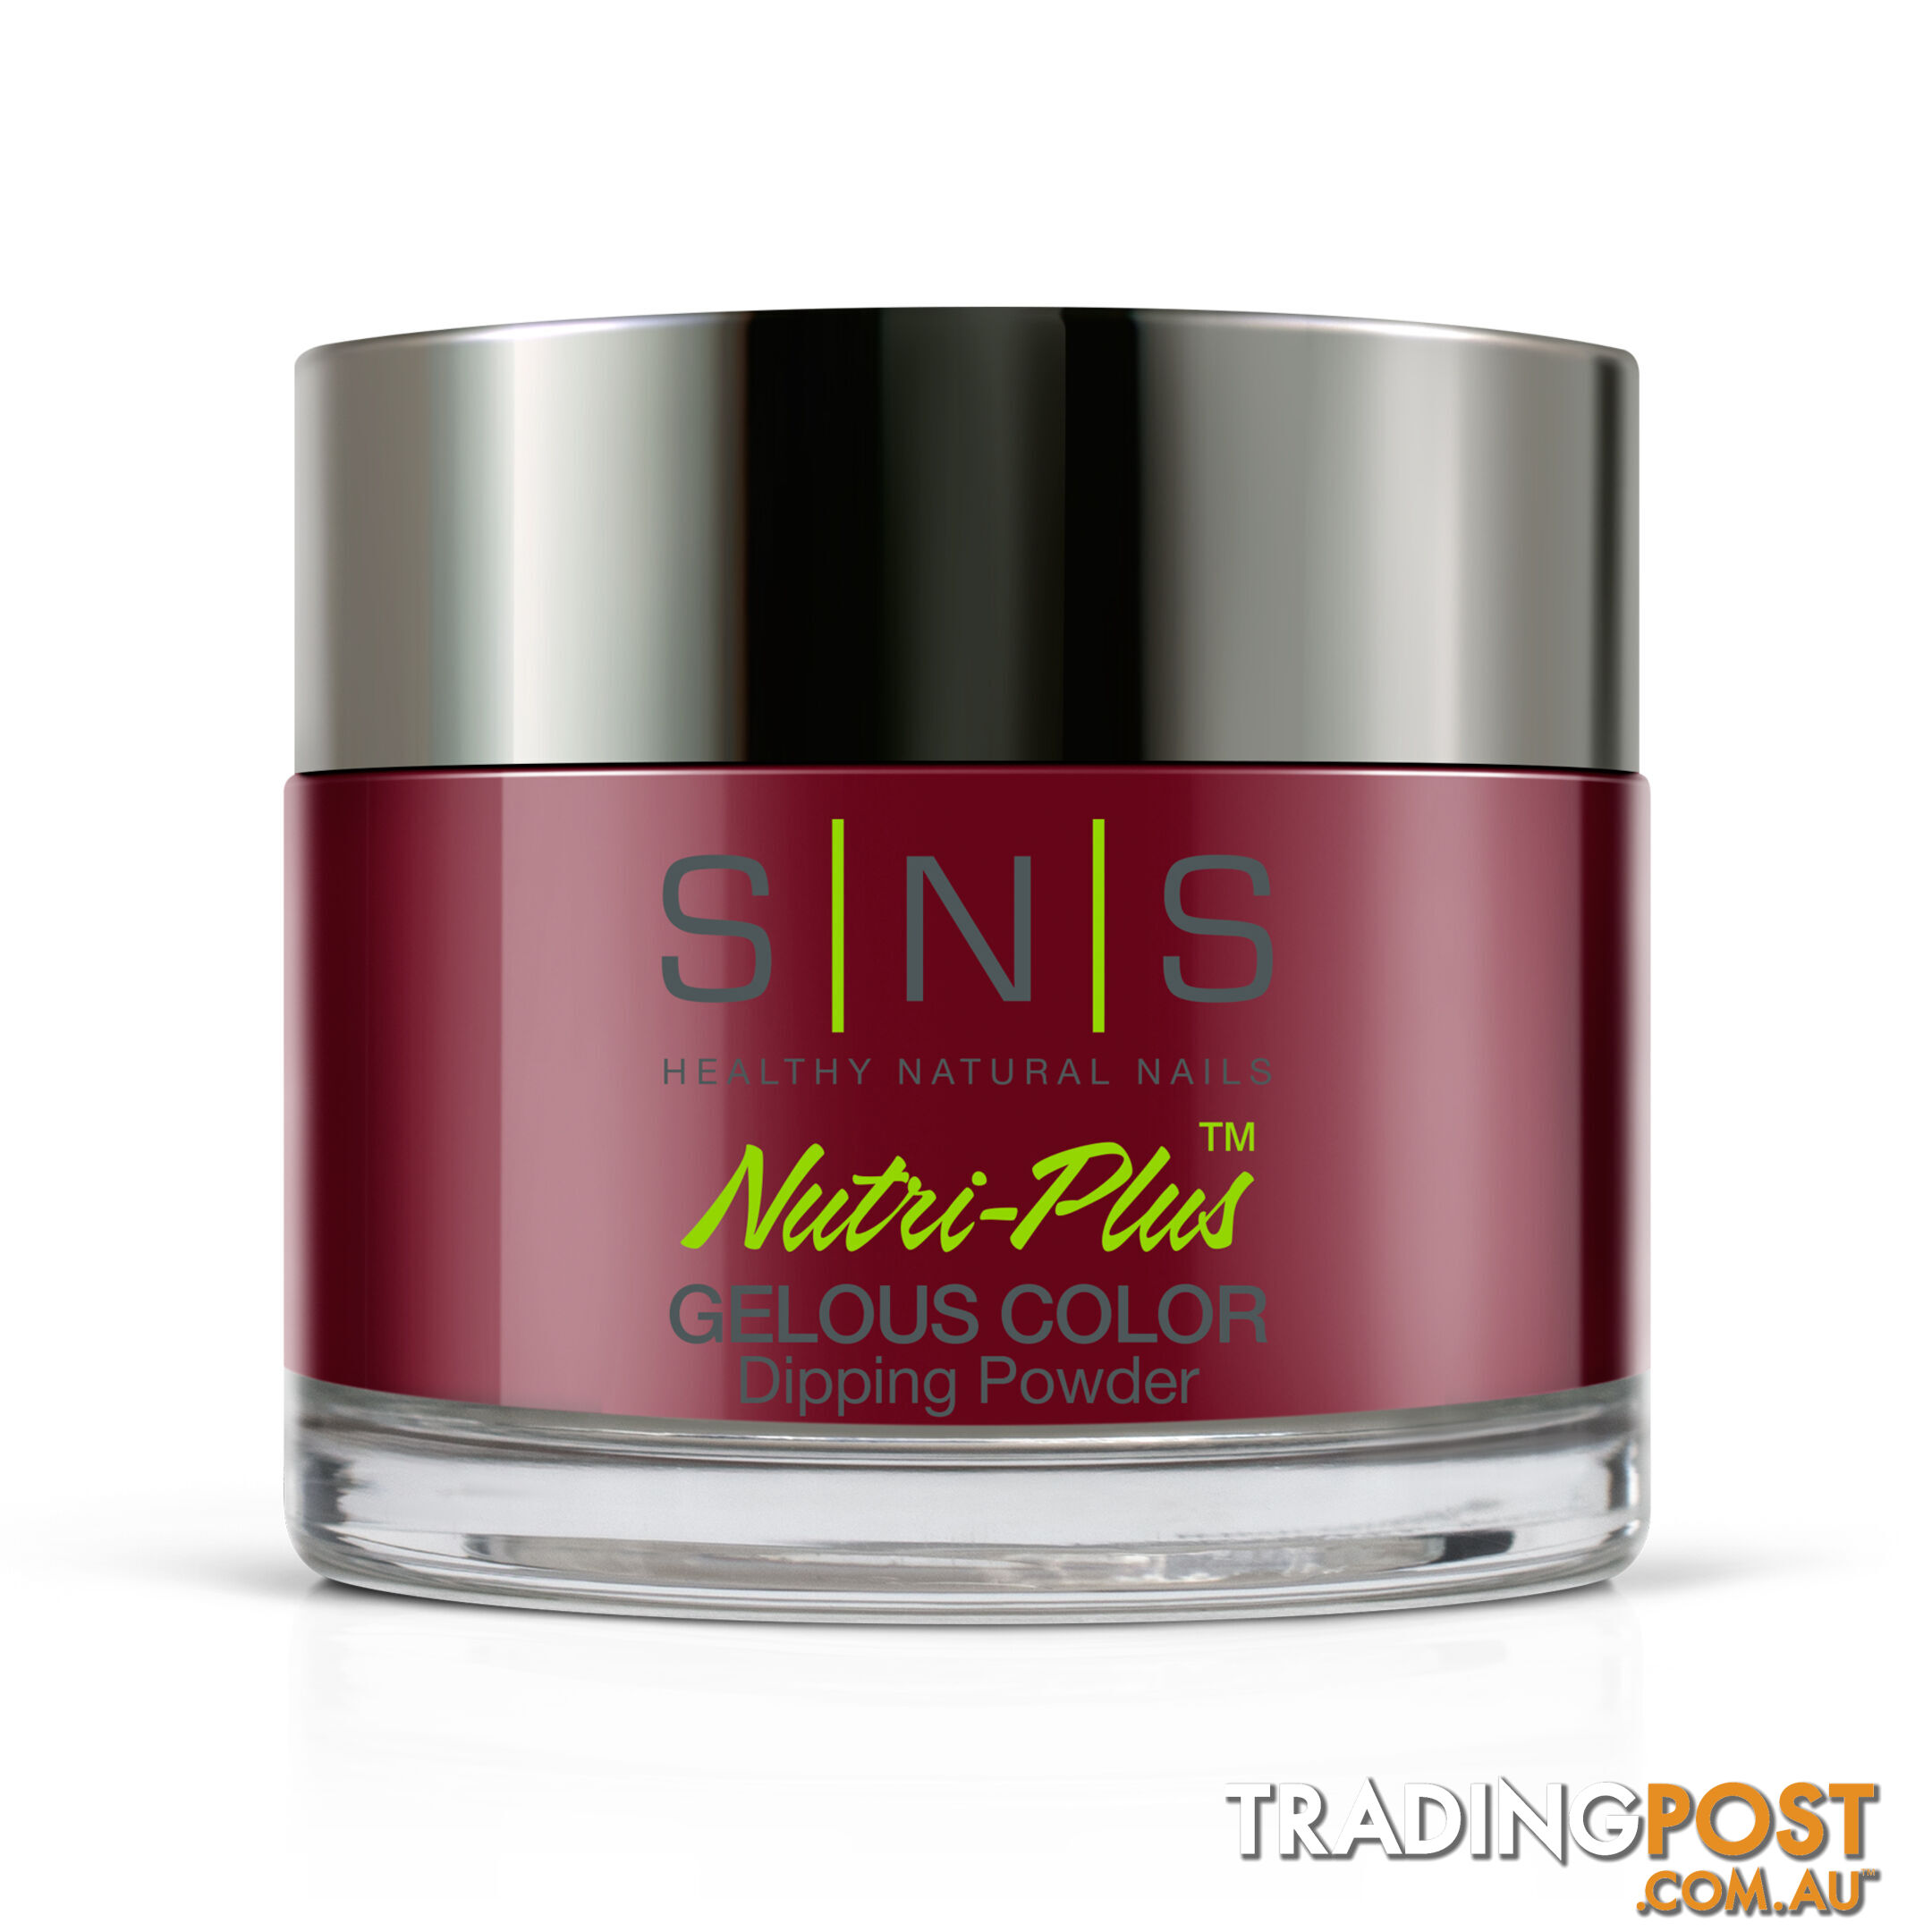 SNS IS10 Gelous Dipping Powder 28g (1oz) Red Red Wine - 655302824177